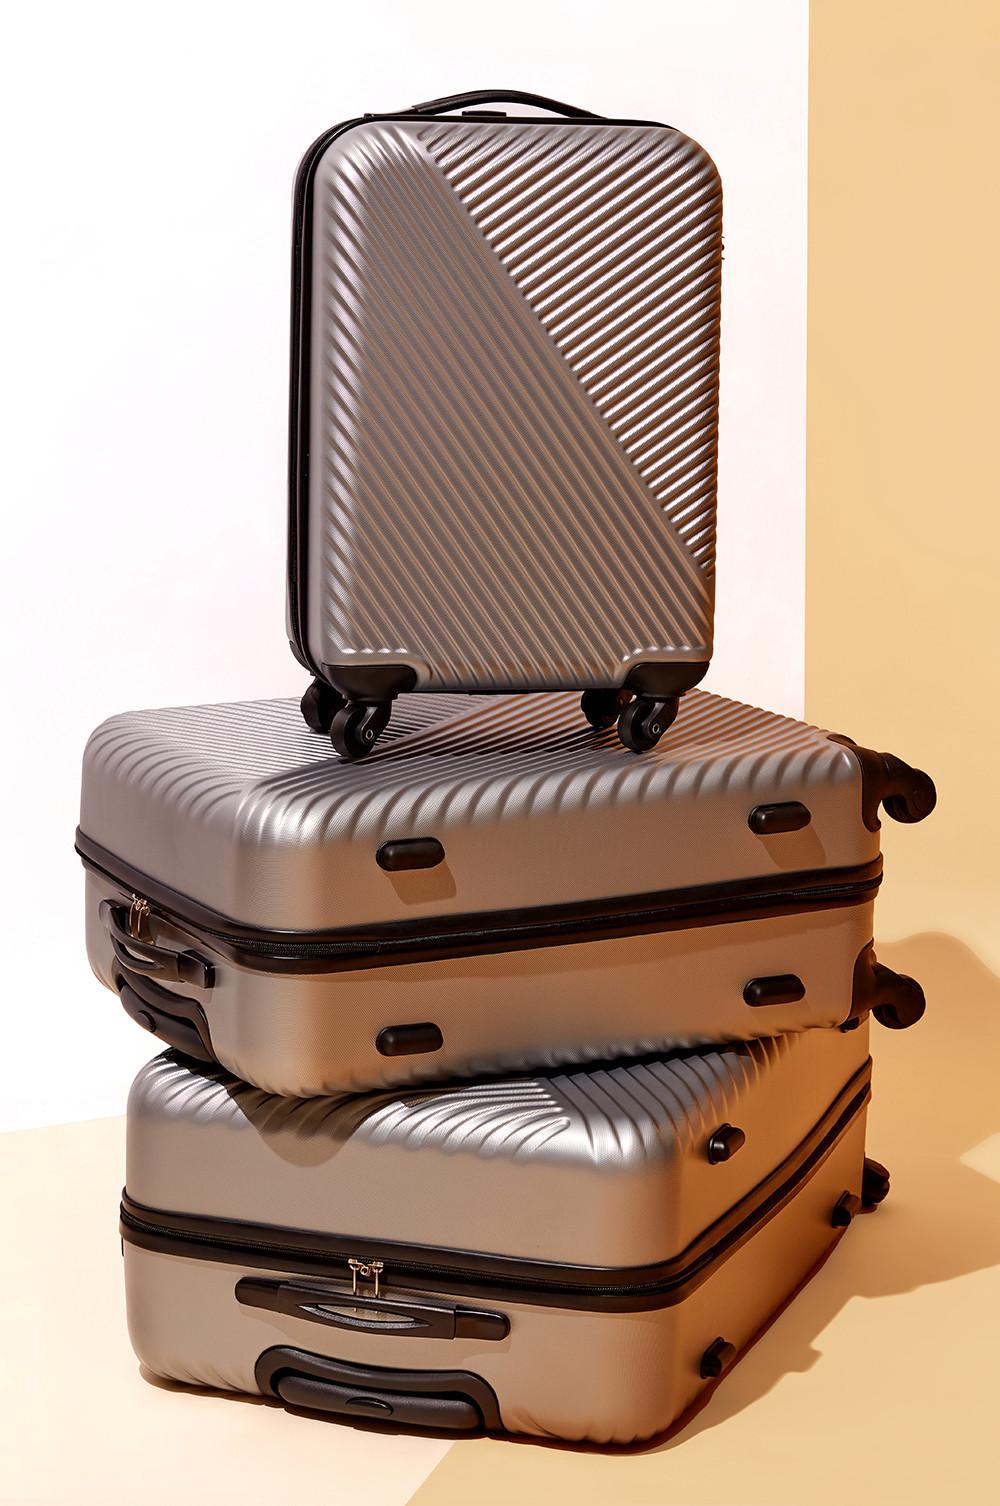 Black and White Suitcases